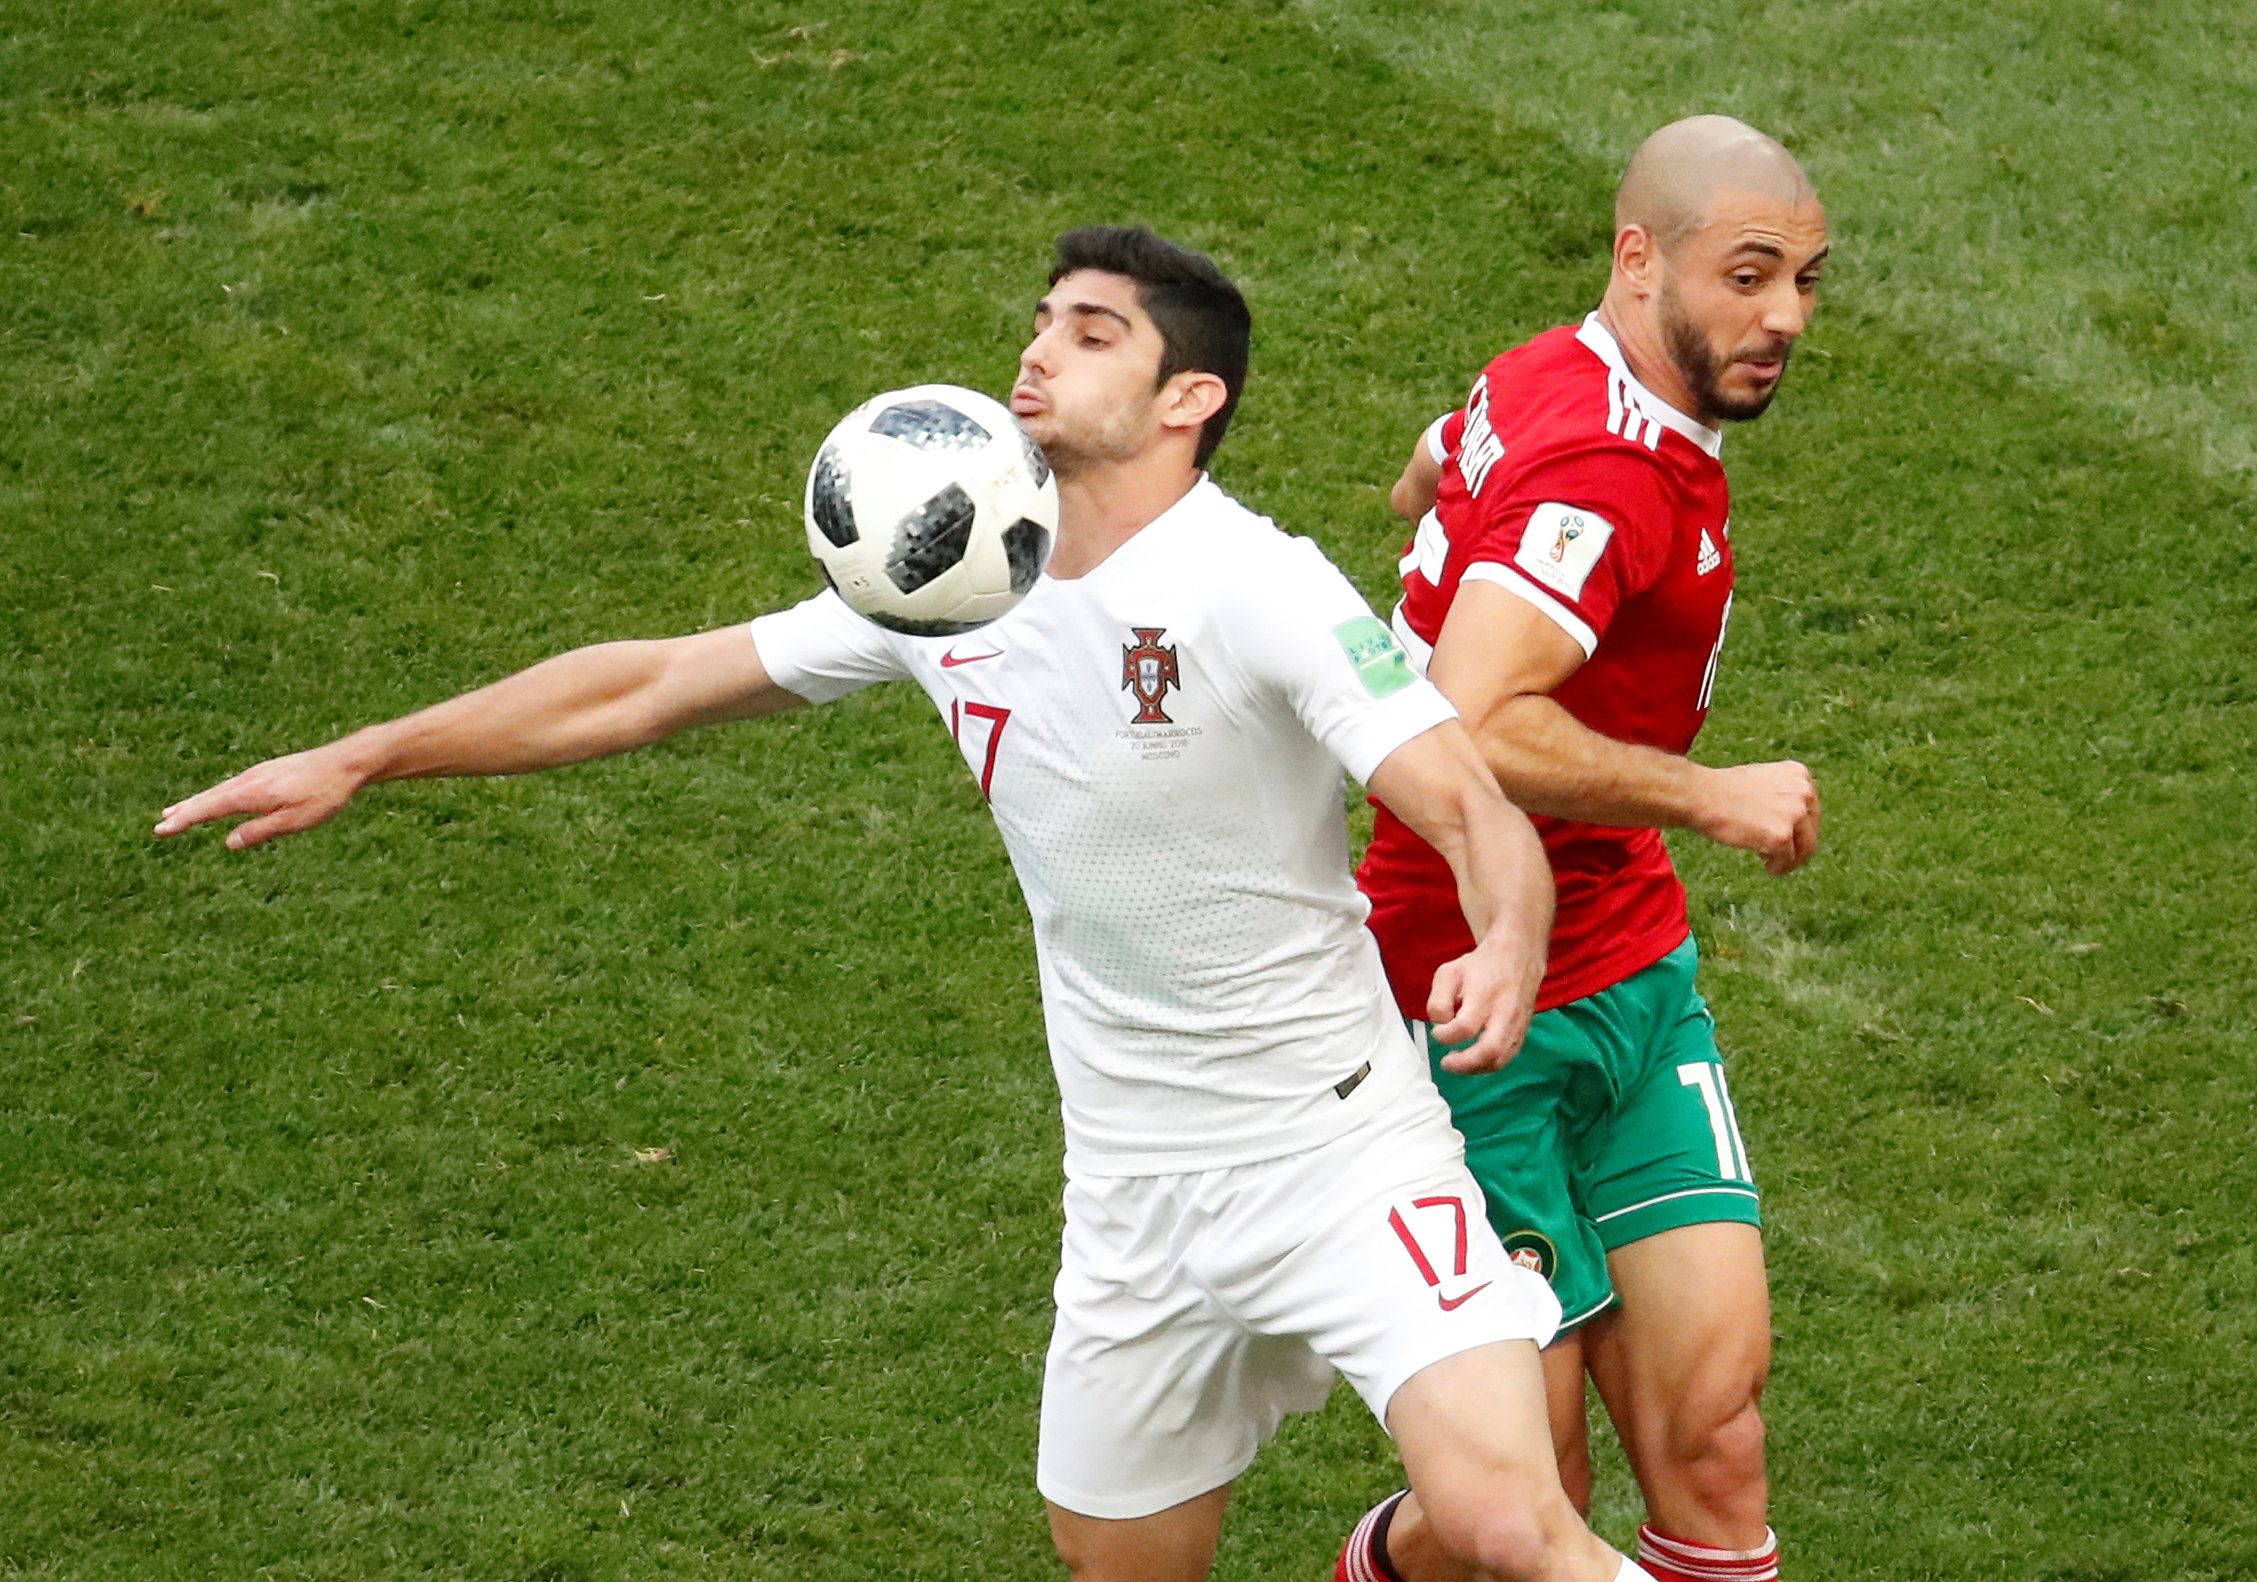 Soccer Football - World Cup - Group B - Portugal vs Morocco - Luzhniki Stadium, Moscow, Russia - June 20, 2018   Portugal's Goncalo Guedes in action with Morocco's Nordin Amrabat     REUTERS/Christian Hartmann